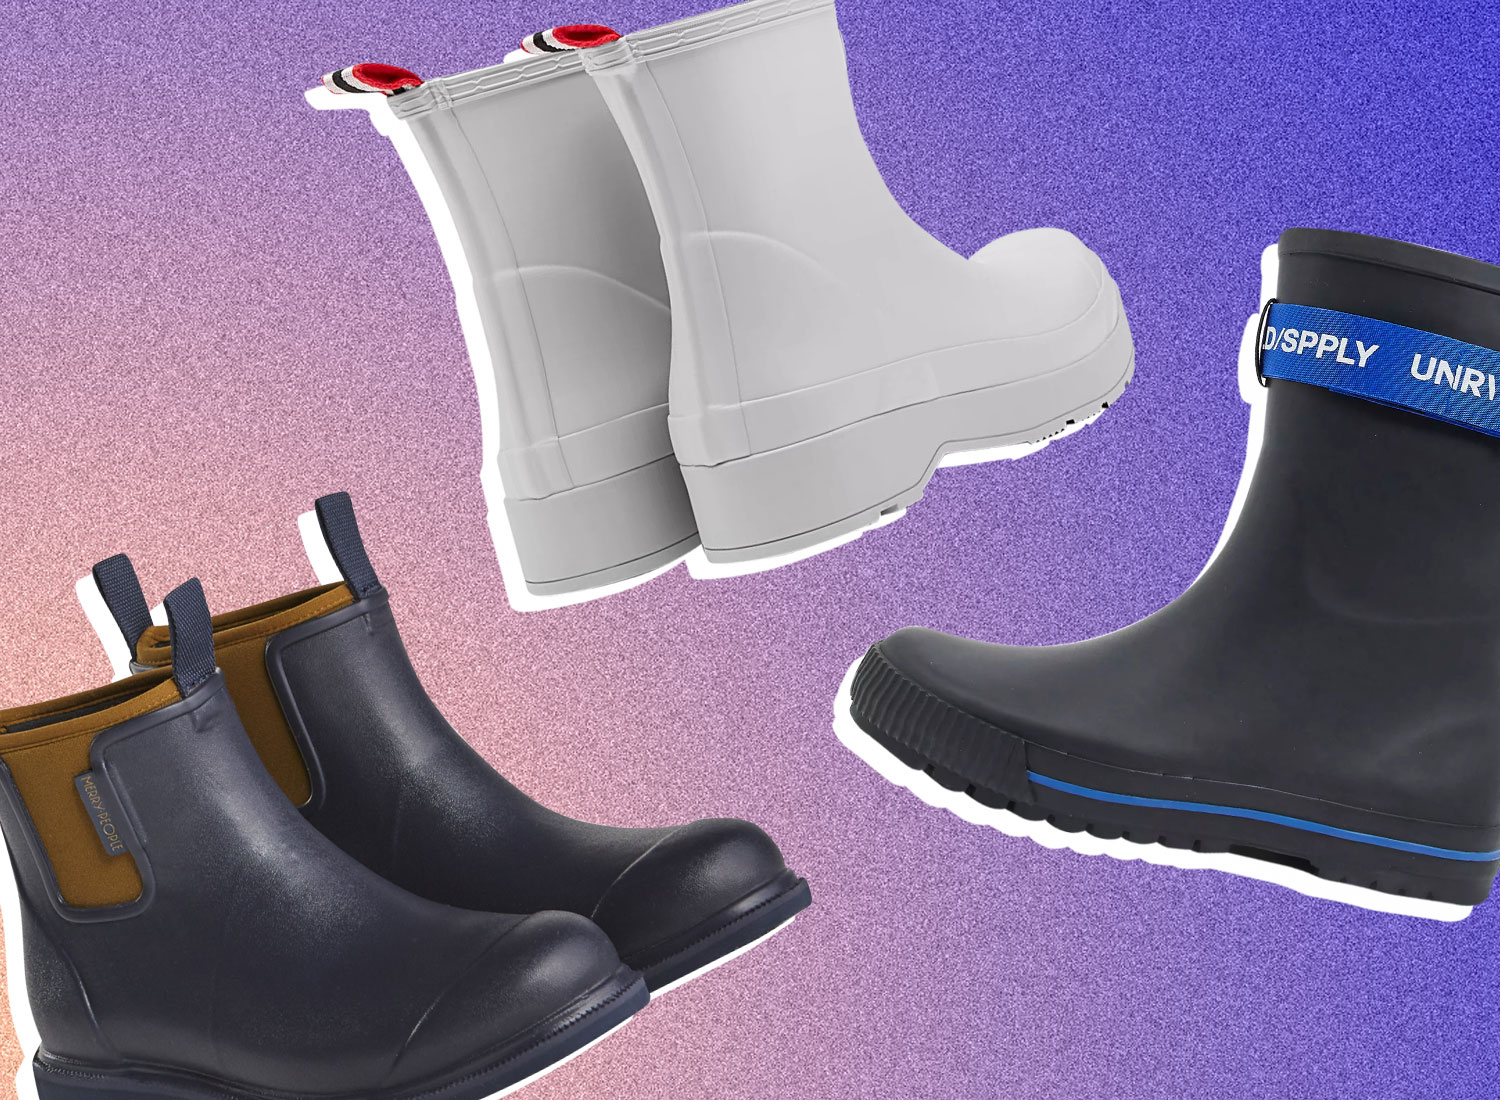 10 Best Men’s Rain Boots For Beating The Wet